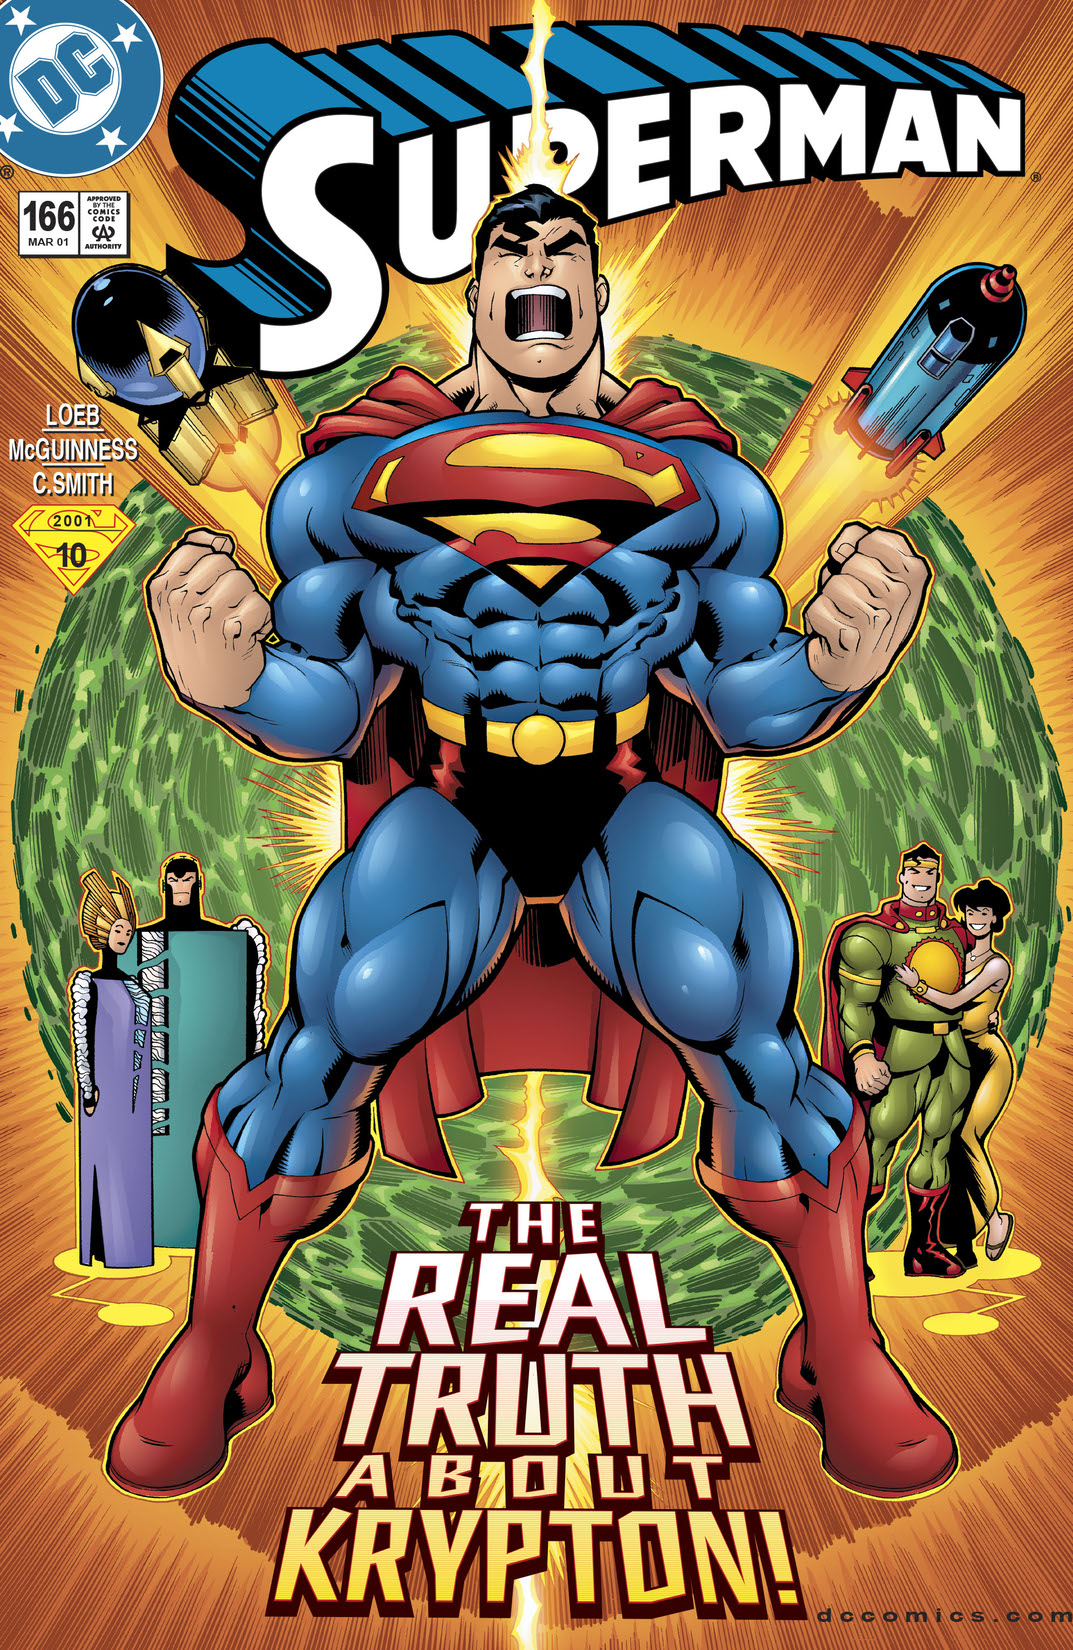 Superman (1986-2006) #166 preview images